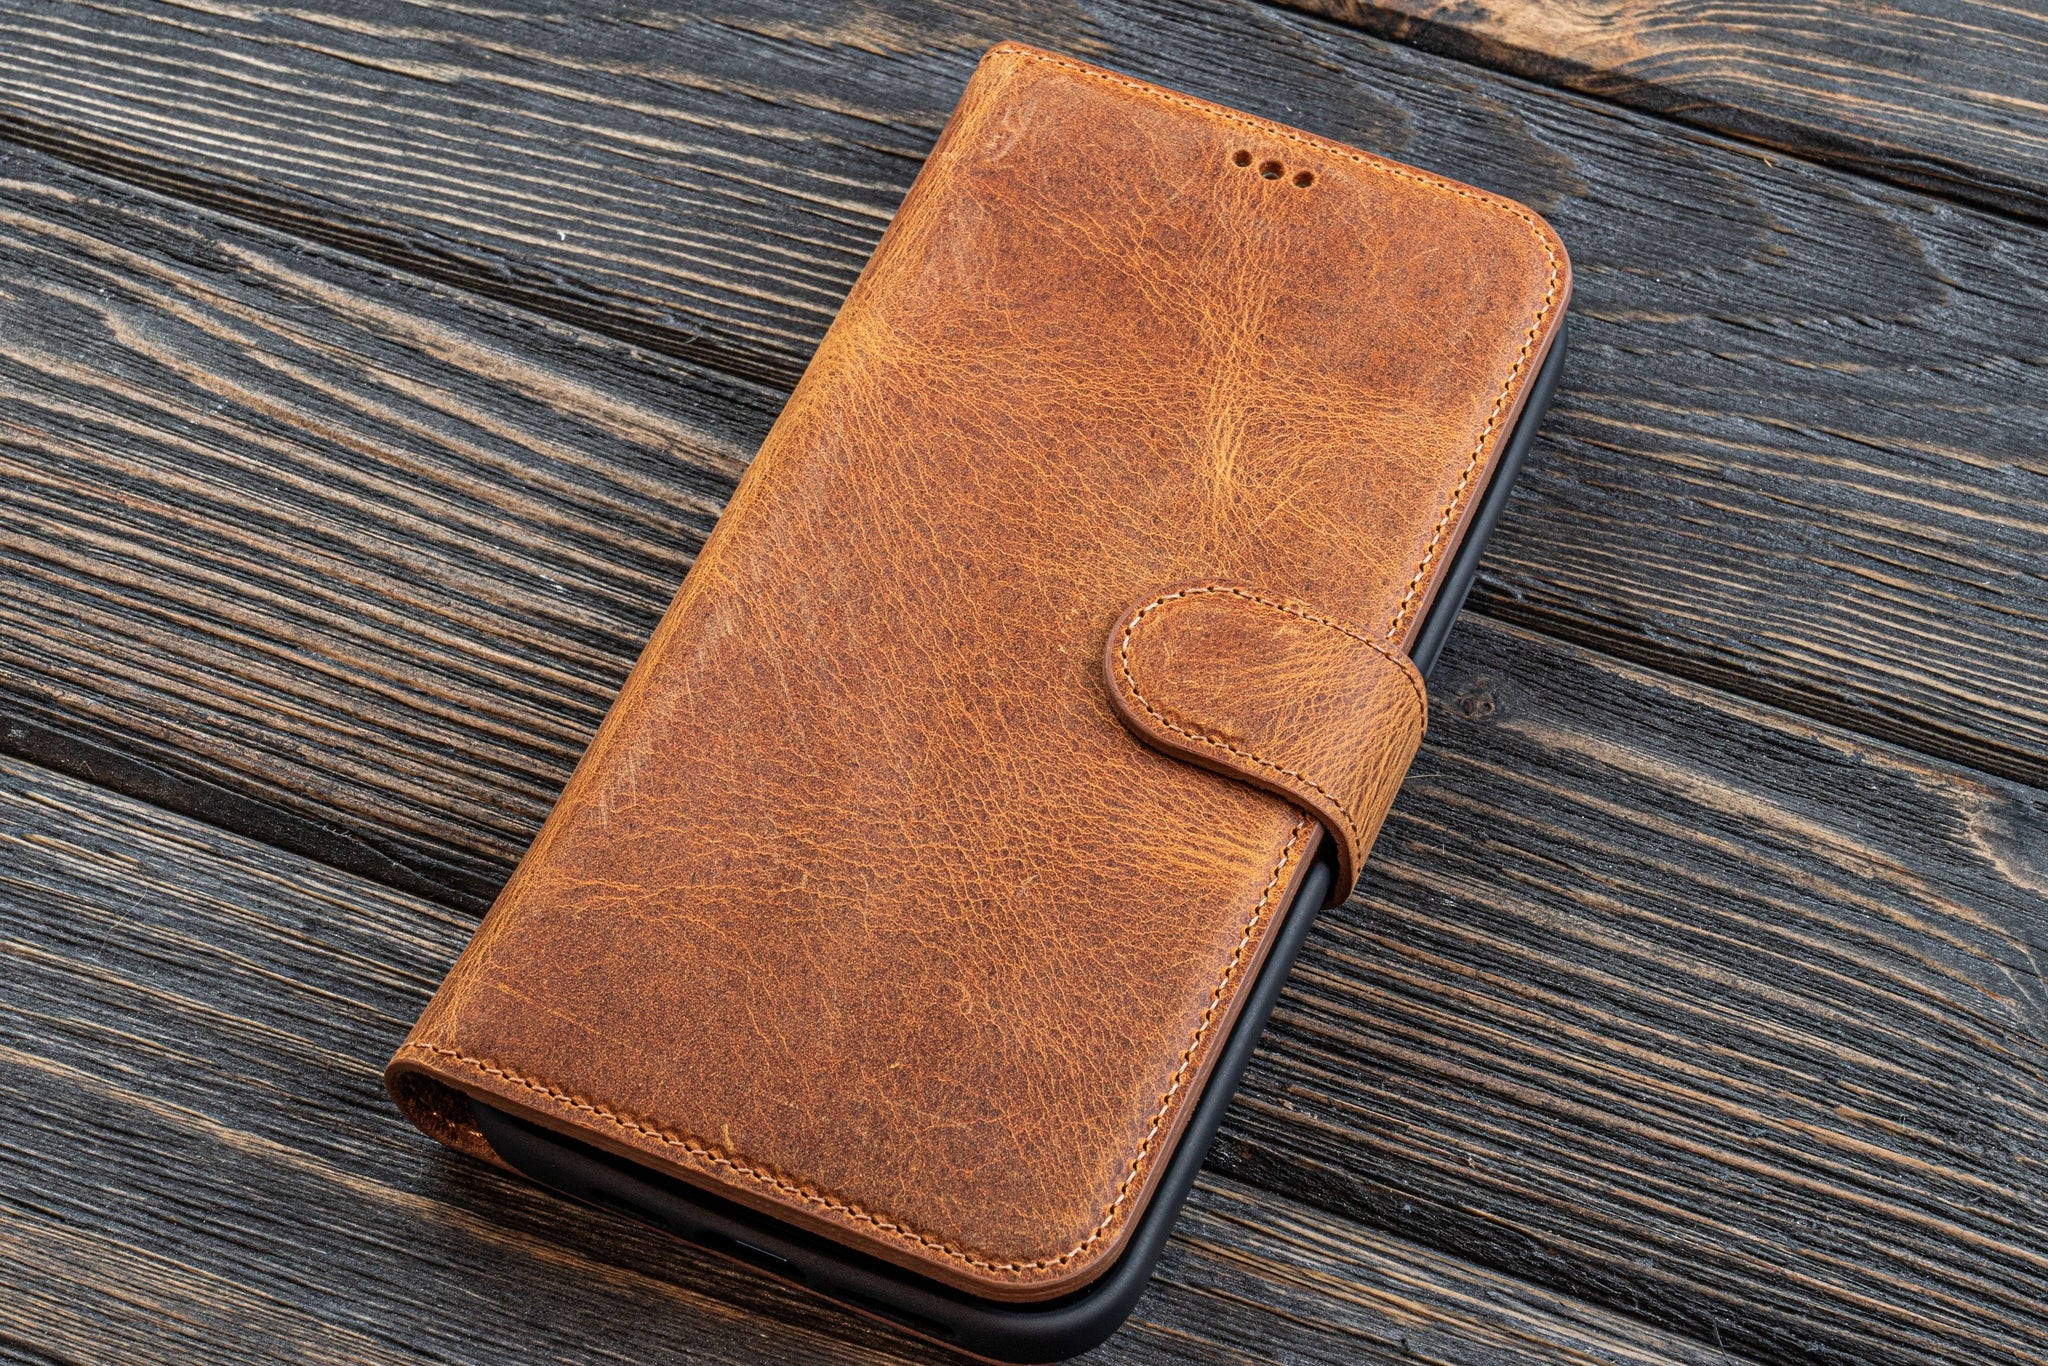 Galen Leather Detachable iPhone 12 Pro Max Leather Wallet Case